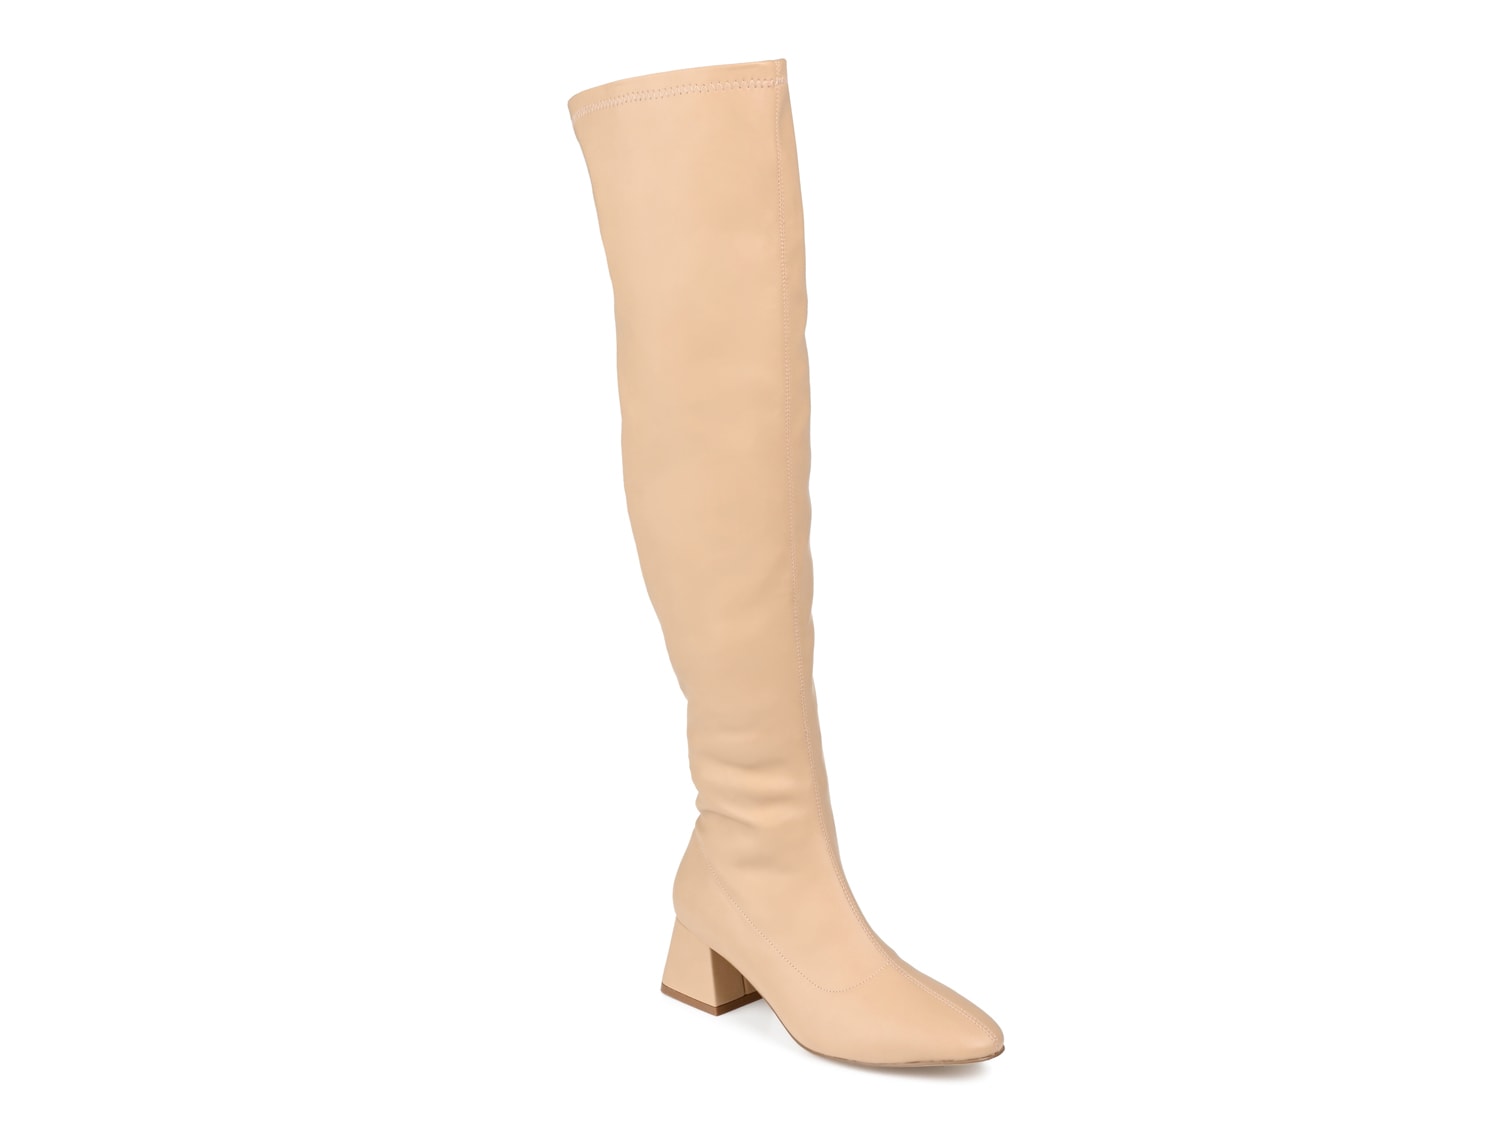 Journee Collection Melika Over-the-Knee Boot - Free Shipping | DSW